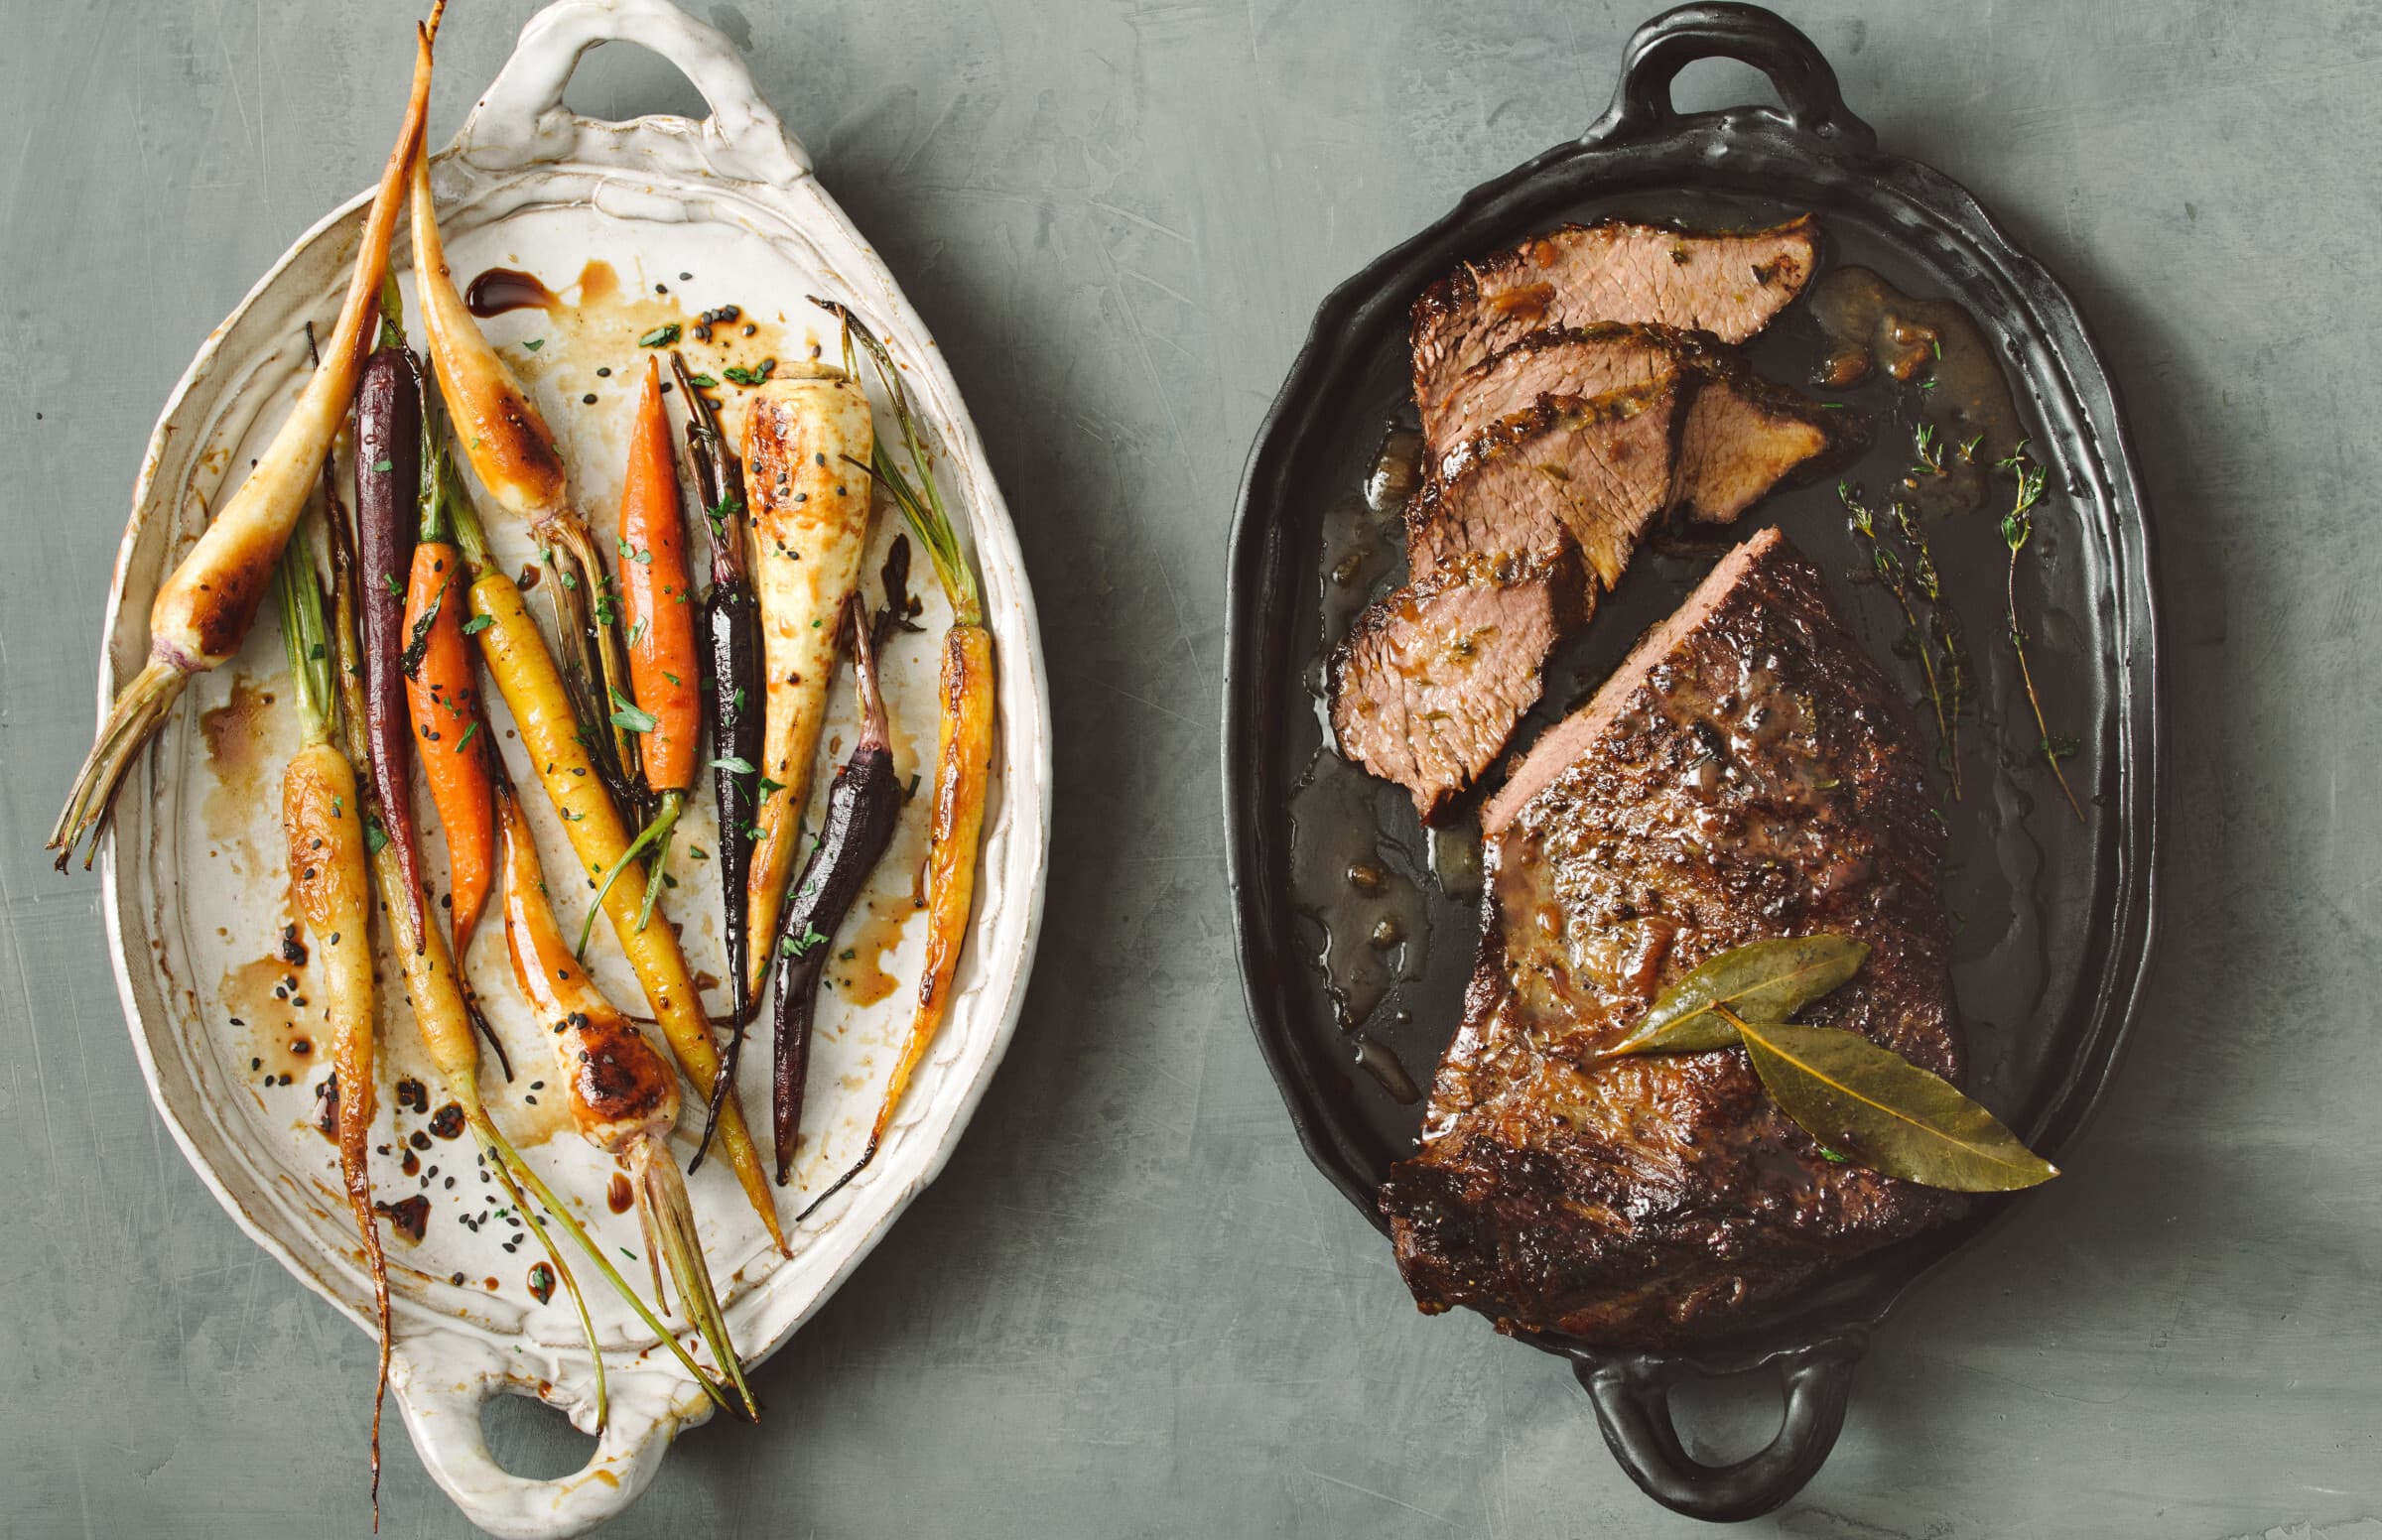 Braised Tri-Tip with Honey-Roasted Carrots & Parsnips (c) Rebecca Sanabr...